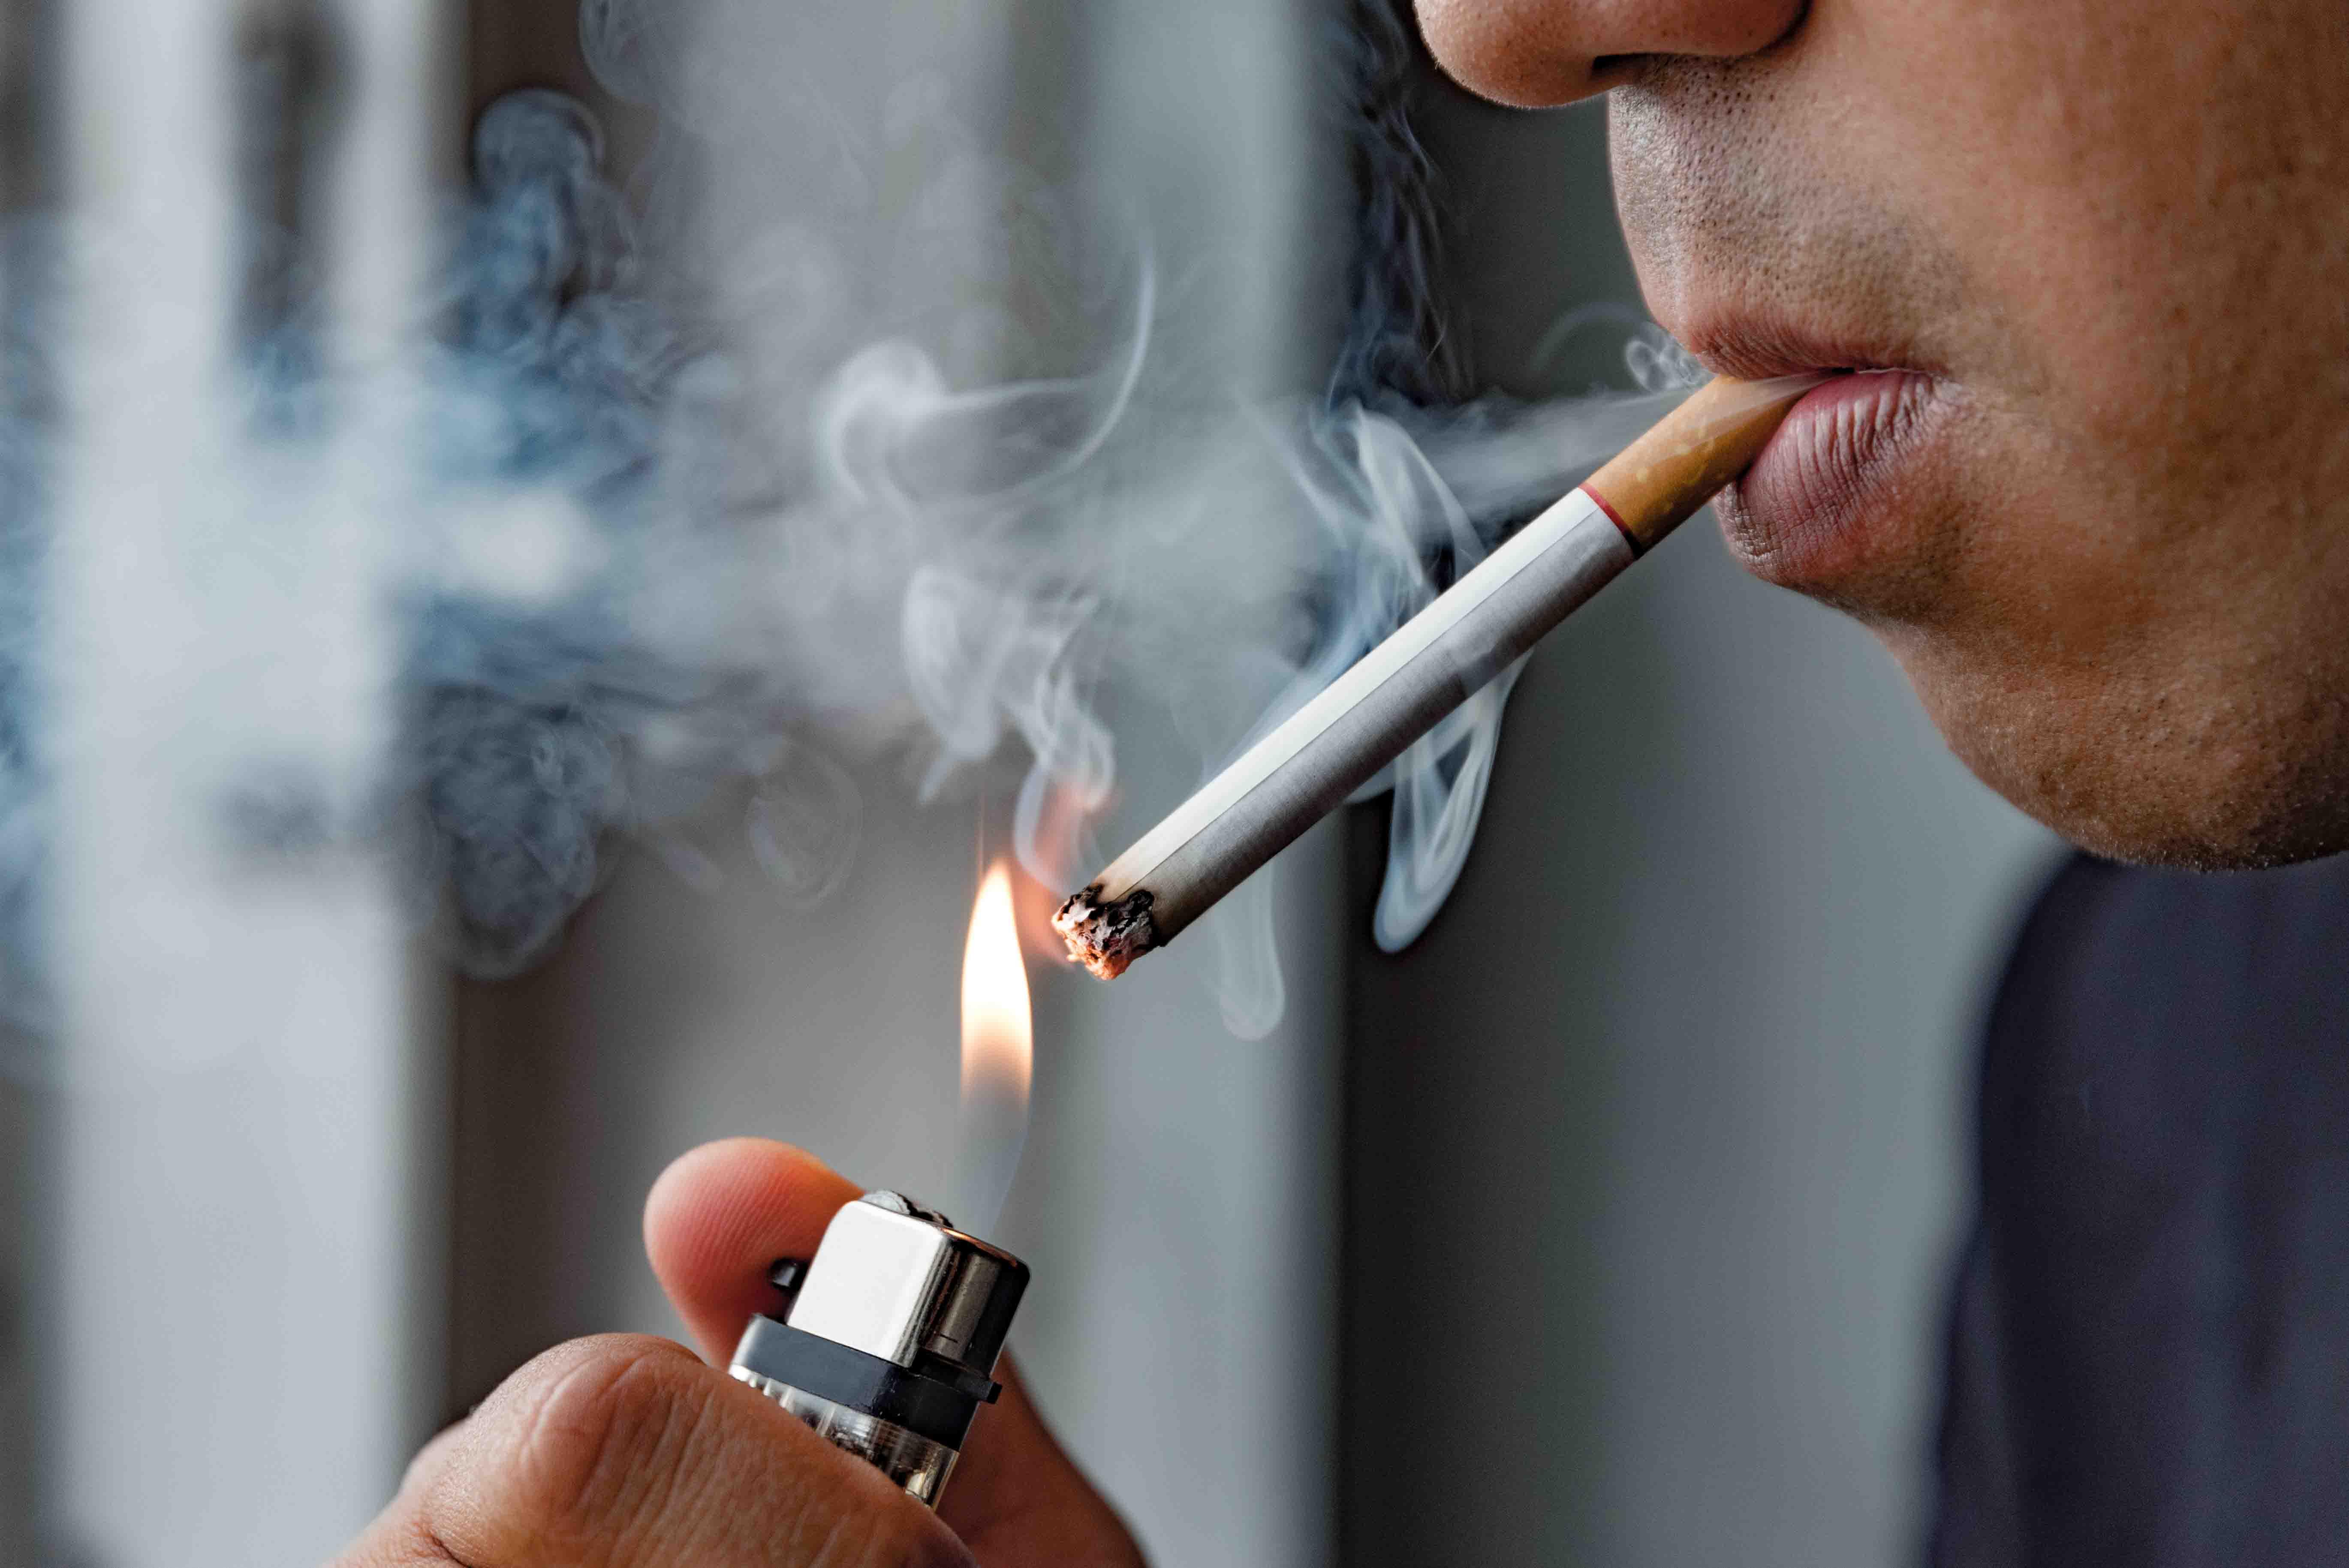 Smoking Increases Your Risk During Surgery: Why You Should Quit Before Seeking Plastic Surgery